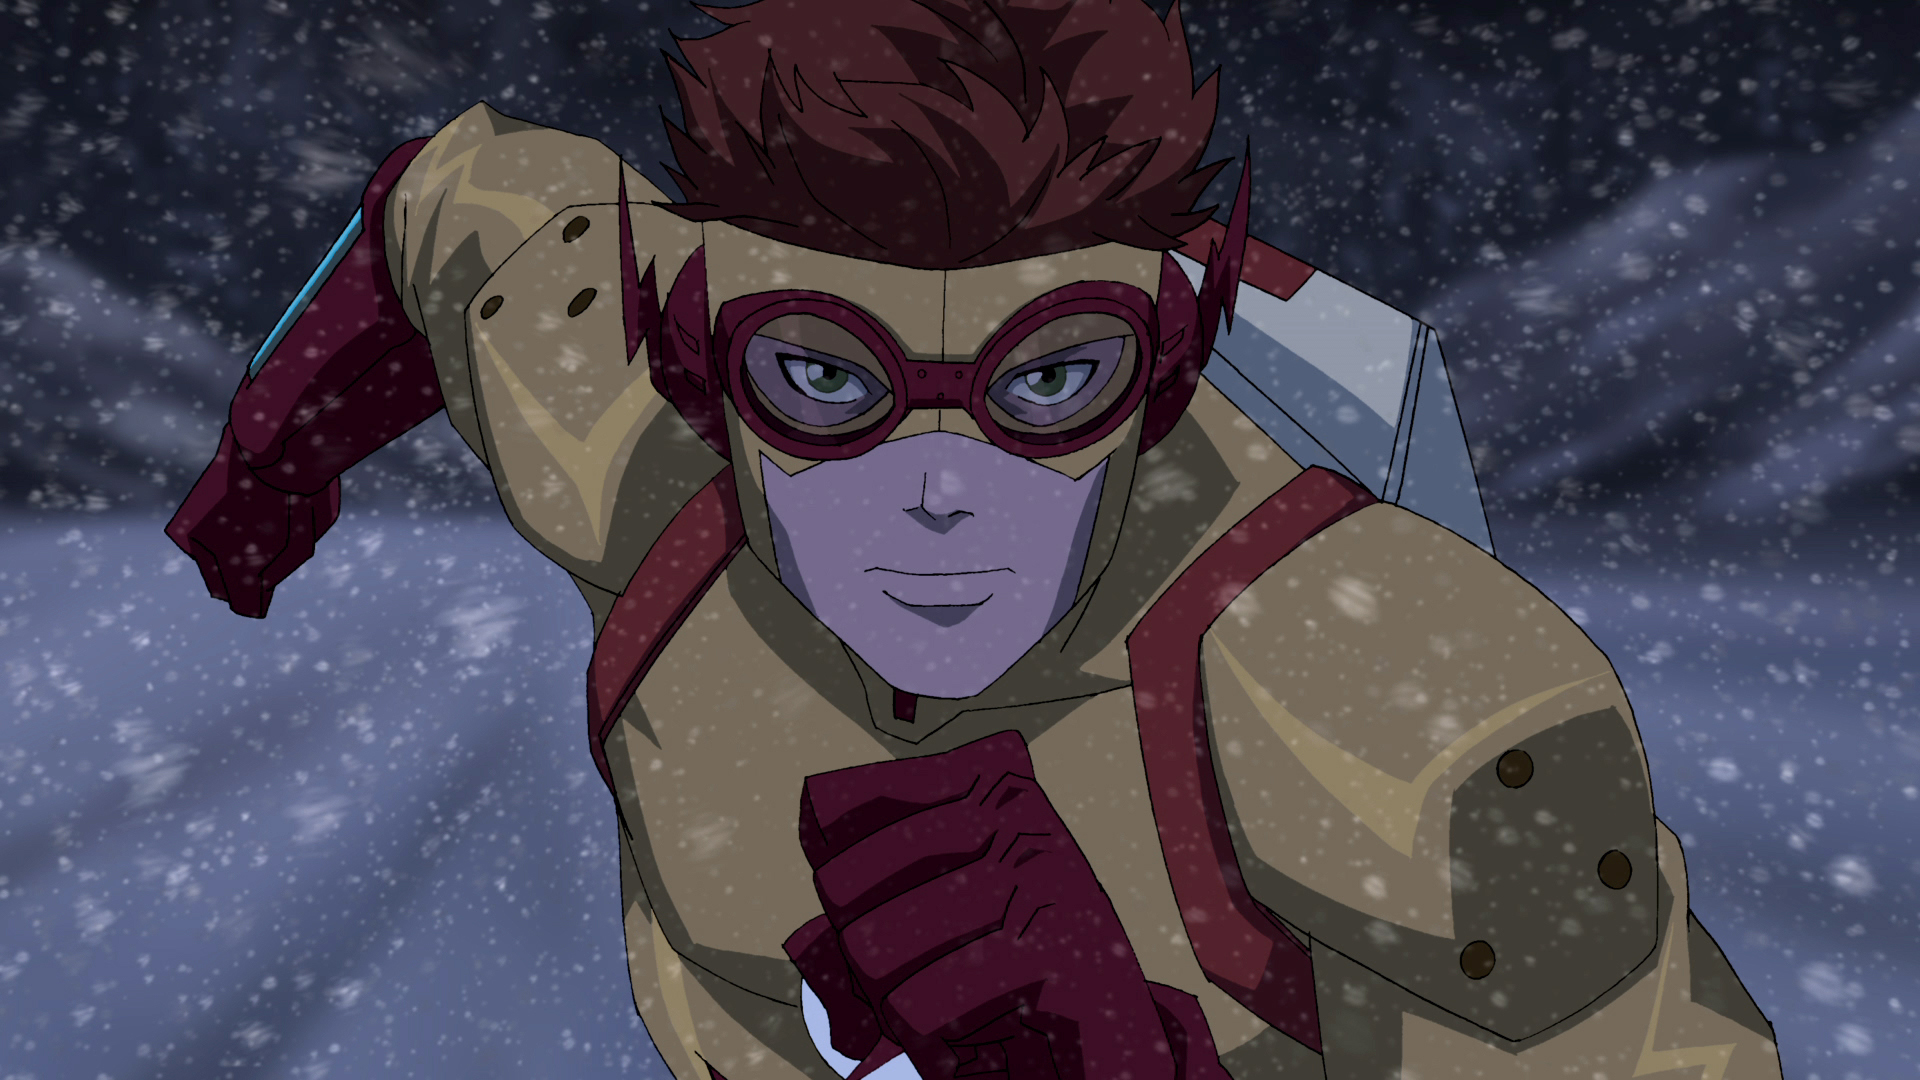 young justice, tv show, dc comics, goggles, green eyes, kid flash, red hair, snow, wally west, young justice (tv show), justice league